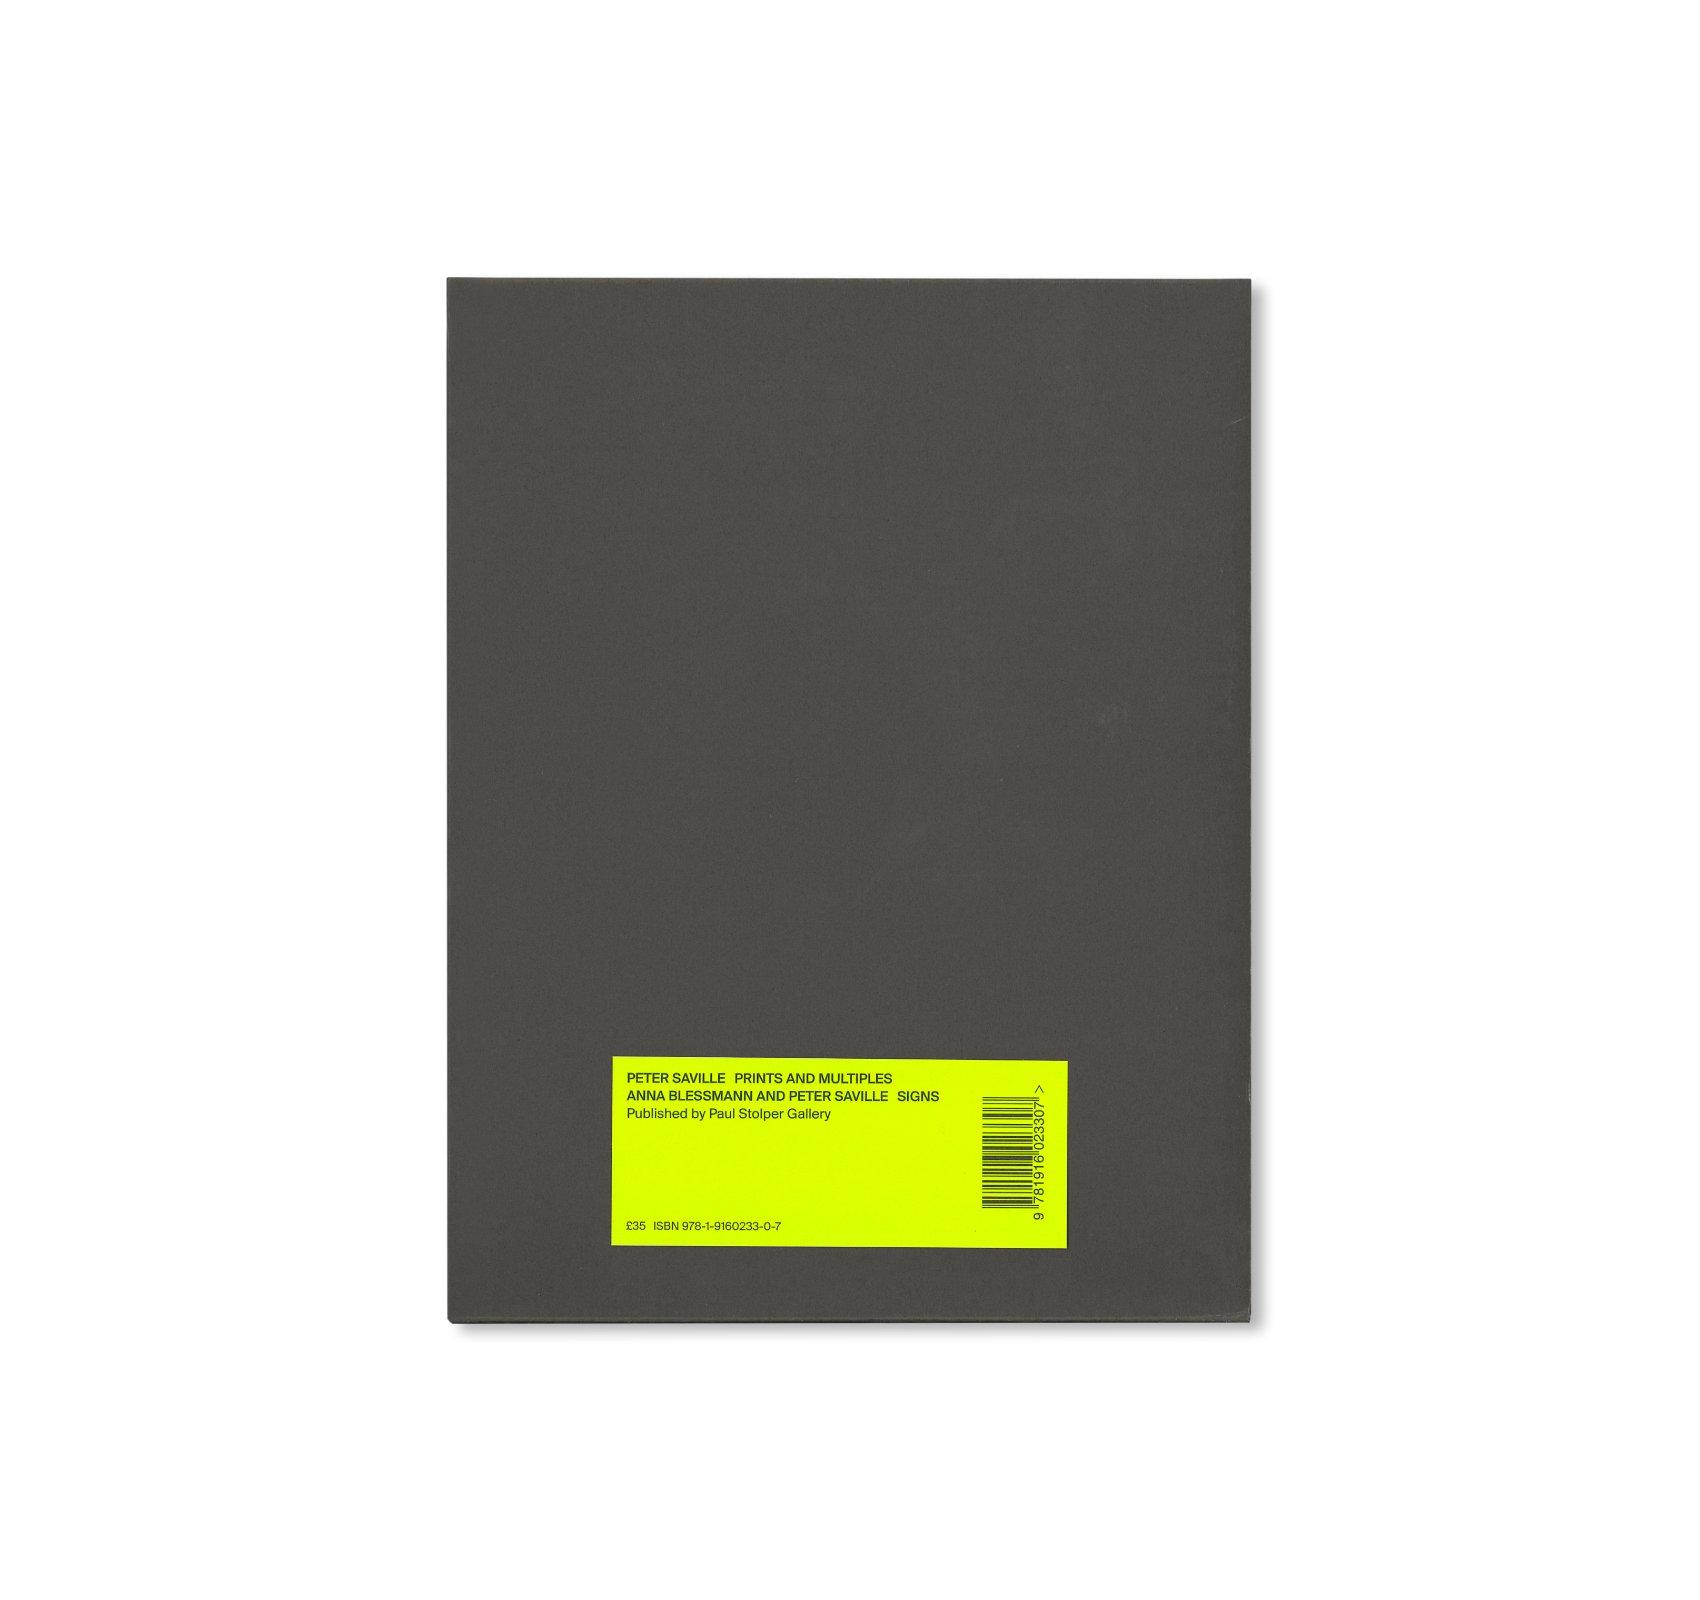 PRINTS AND MULTIPLES/ANNA BLESSMANN AND PETER SAVILLE by Peter Saville　作品集